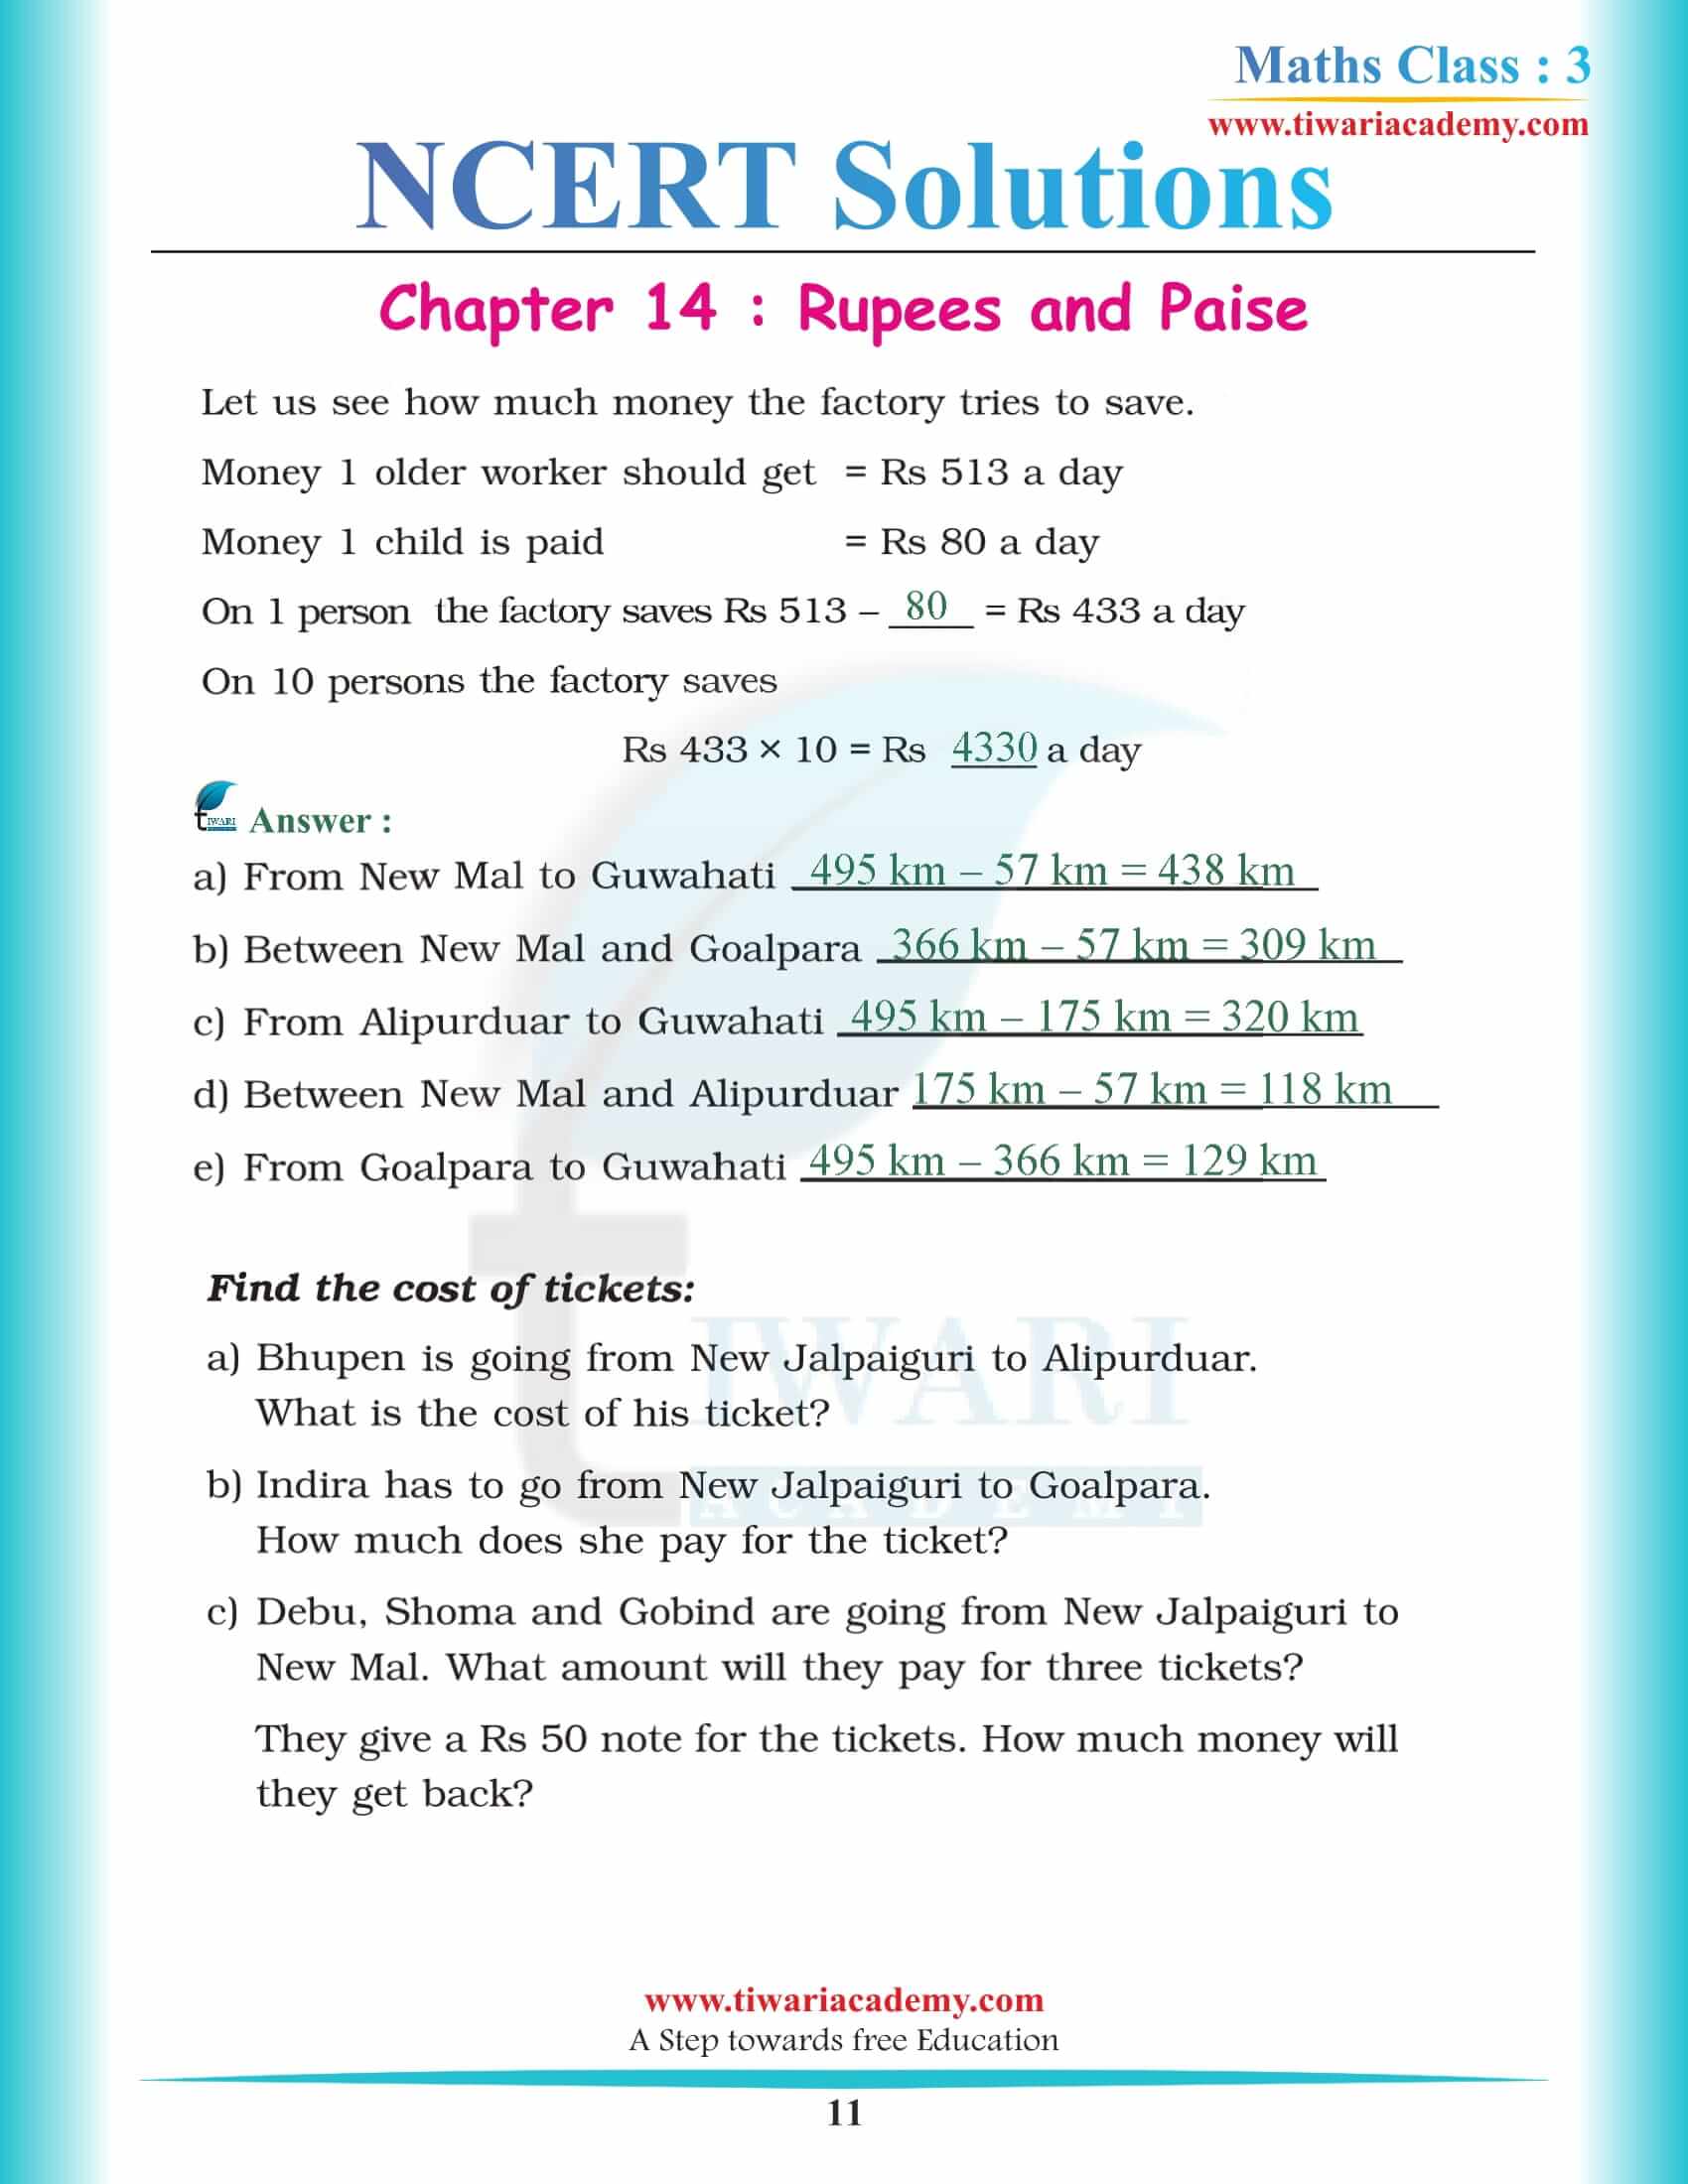 Class 3 Maths Chapter 14 sols in English